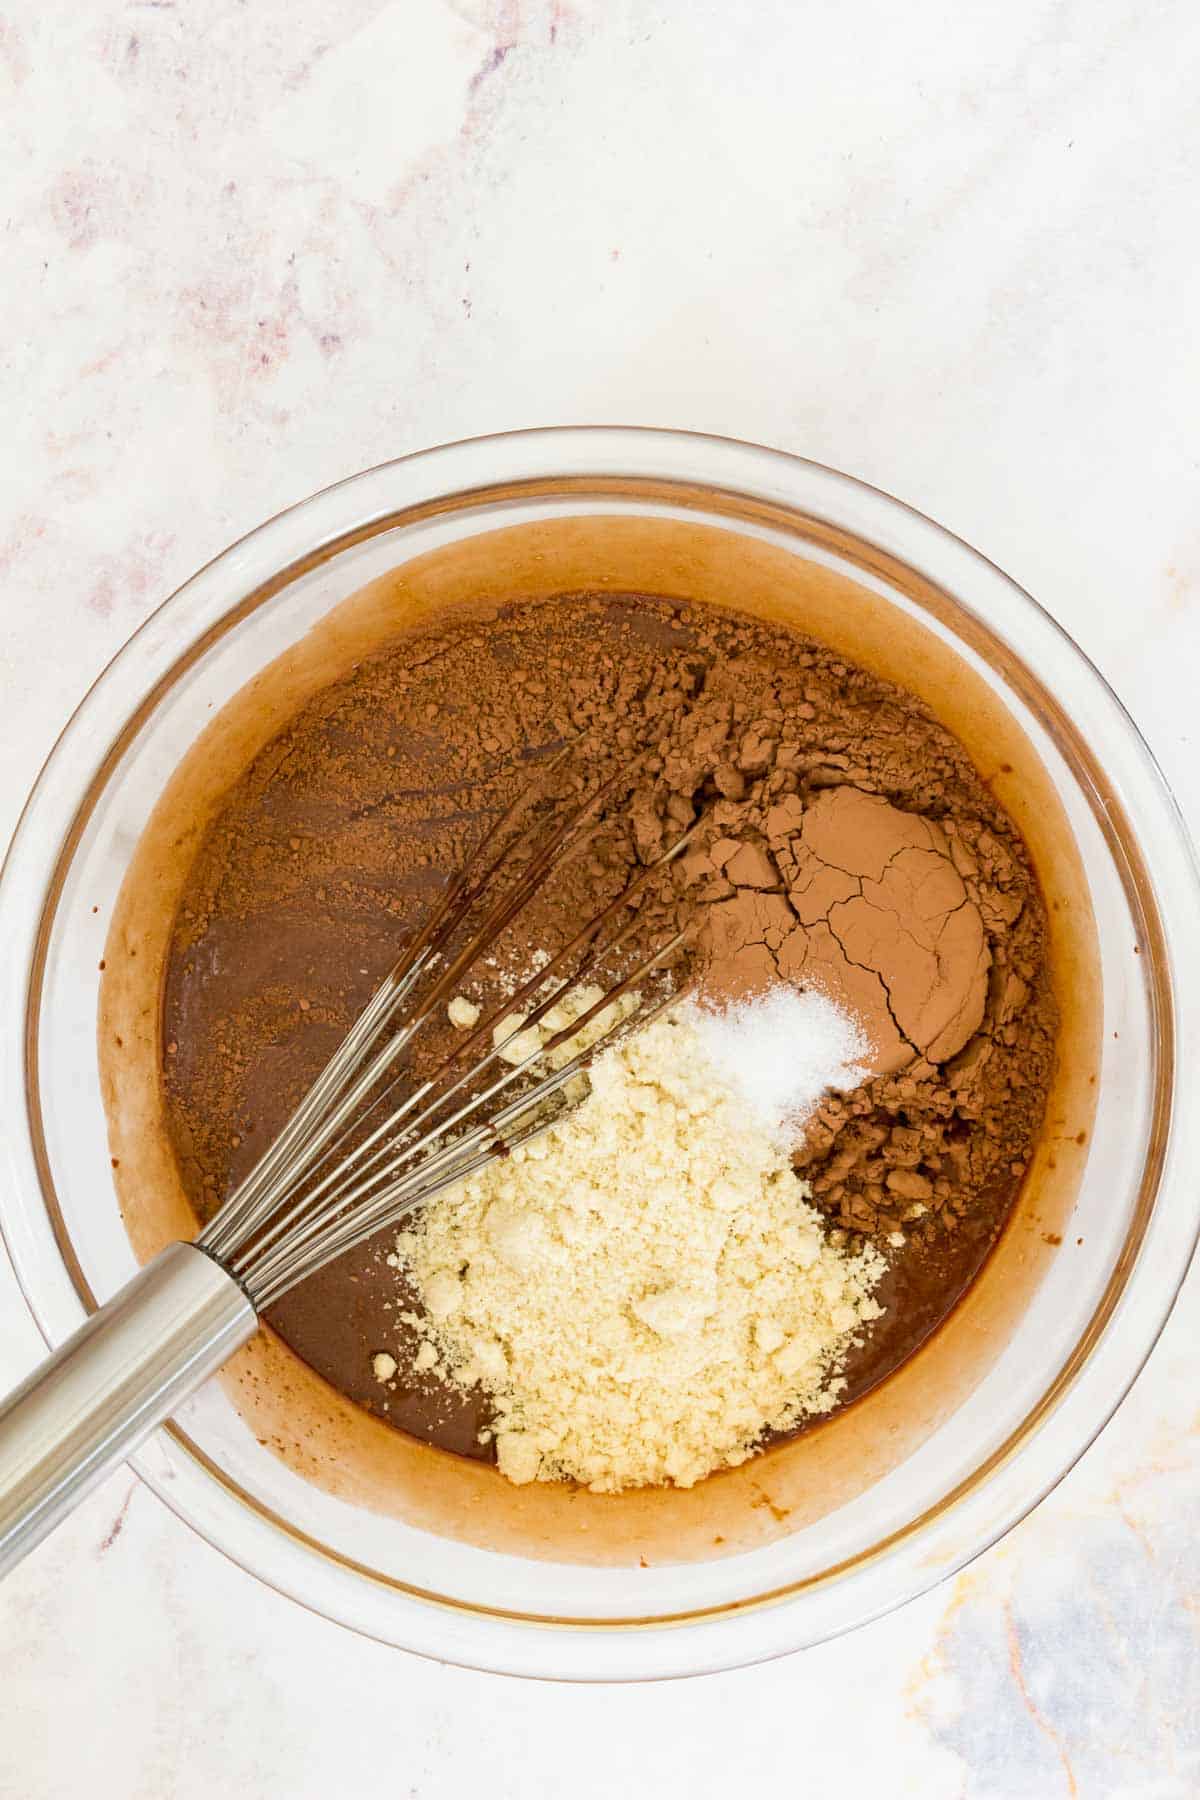 Dry ingredients are whisked into a mixing bowl with the wet ingredients for brownie batter.